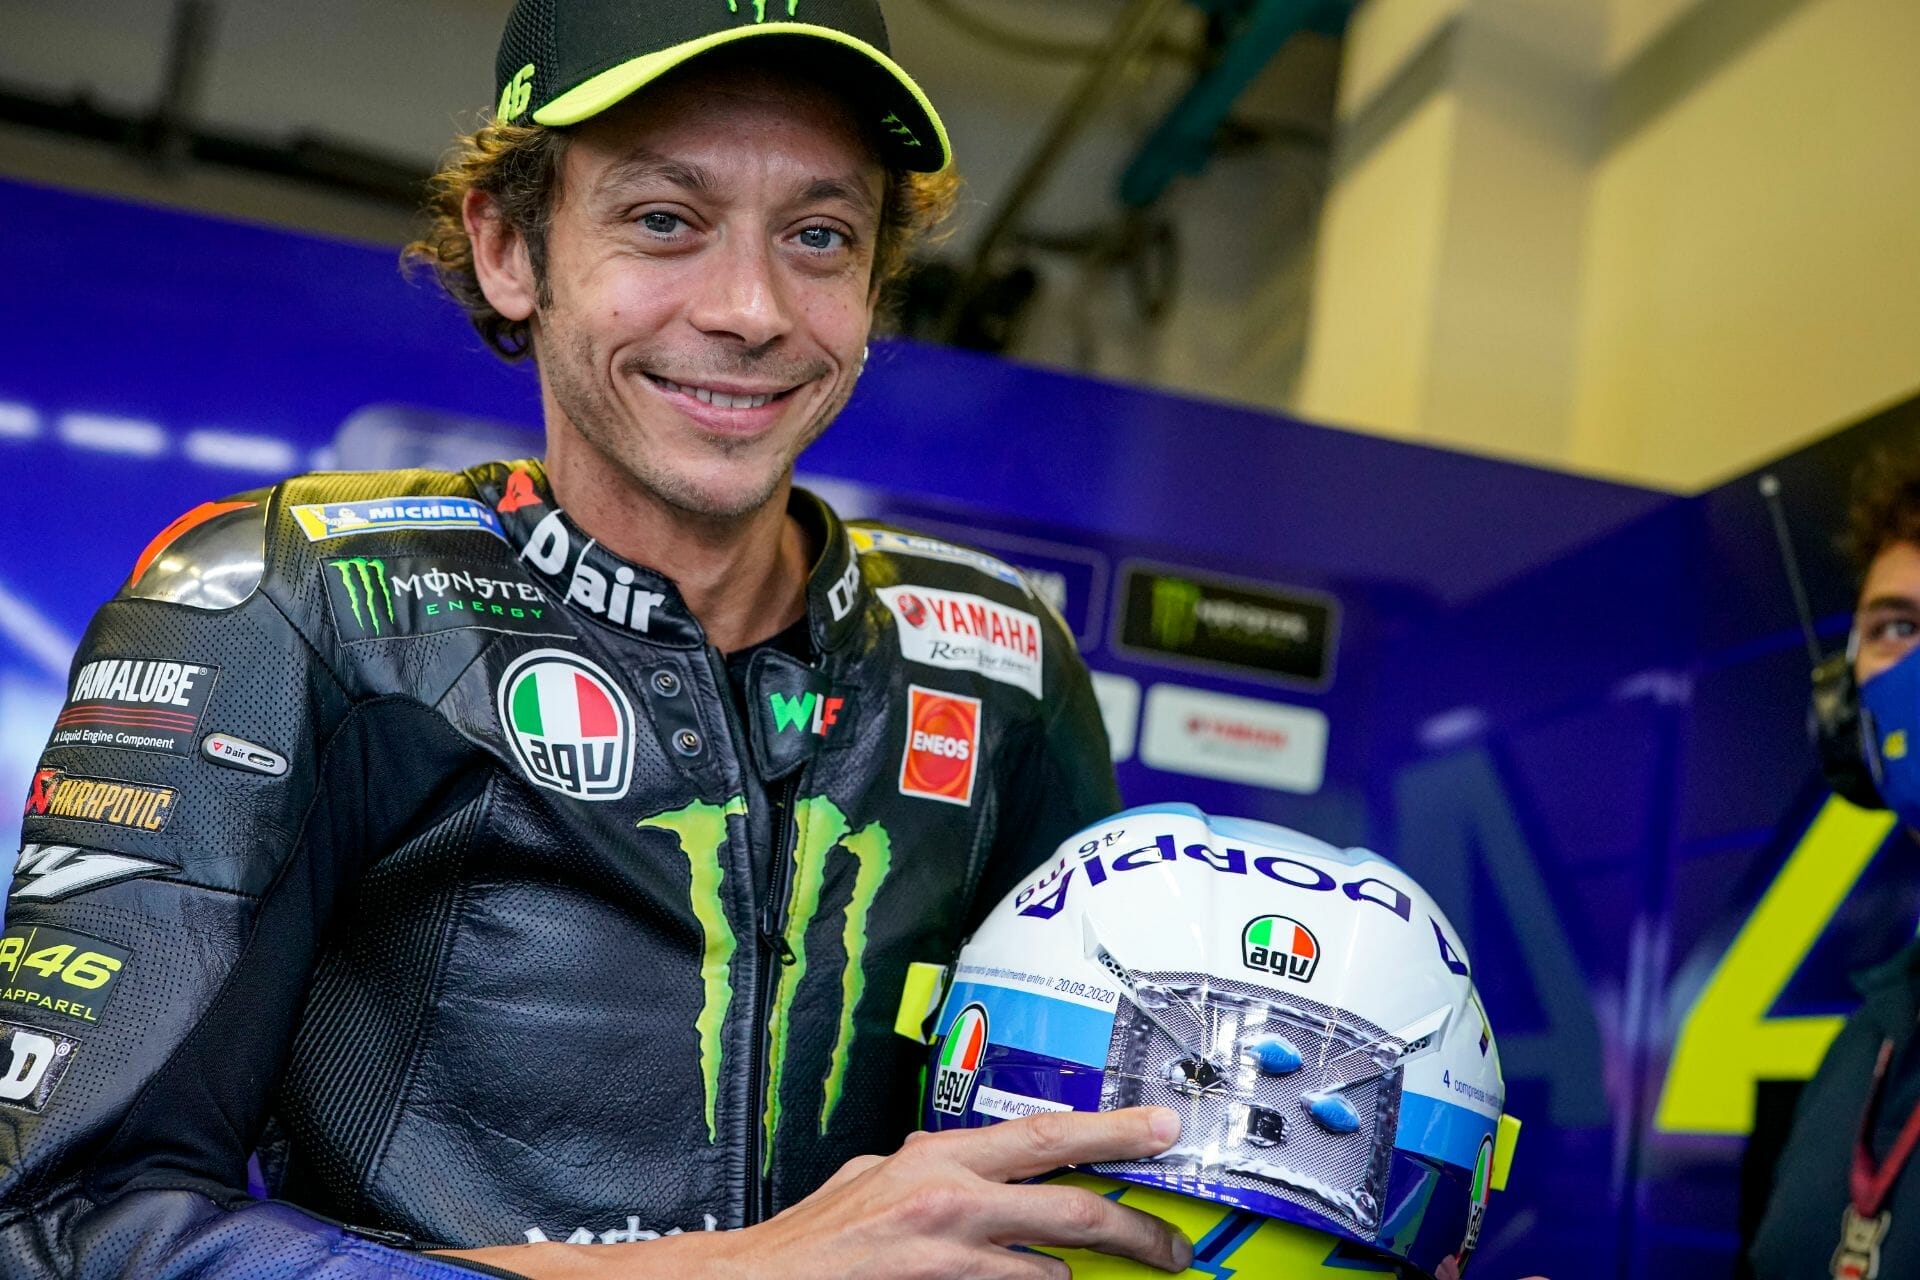 Valentino Rossi will also race in MotoGP in 2021 - Motorcycles. - Motorcycle-Magazine